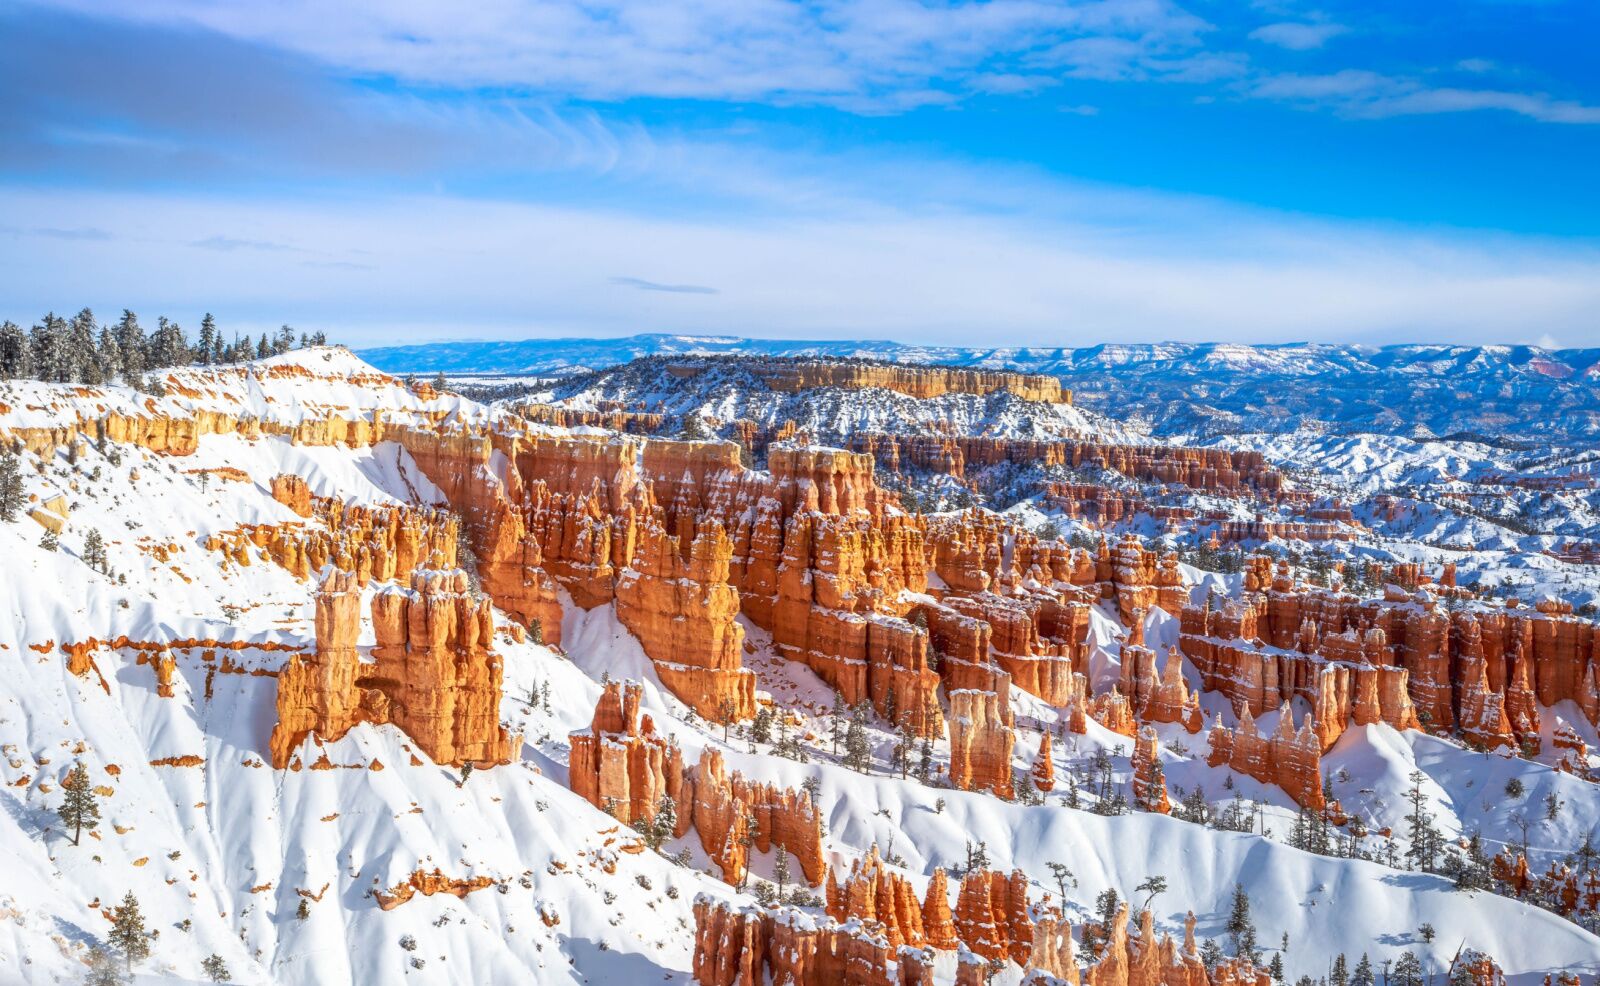 zion vs bryce canyon - snow on hoodoos in bryce